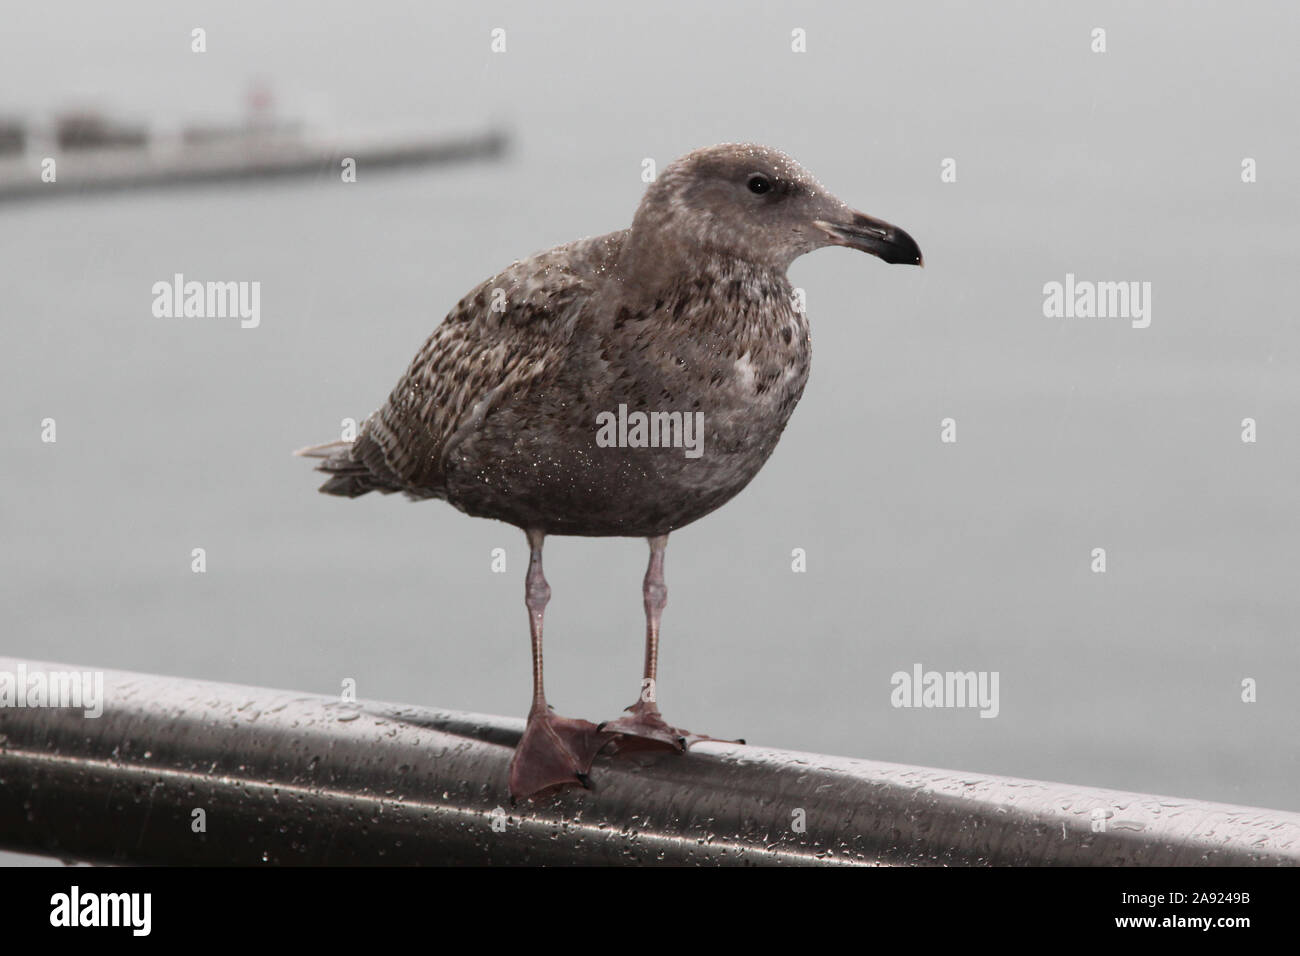 A European herring gull (Larus argentatus) seagull rests on railing along the Seawall Water Walk on Vancouver's Harbour front, British Columbia, Canad Stock Photo